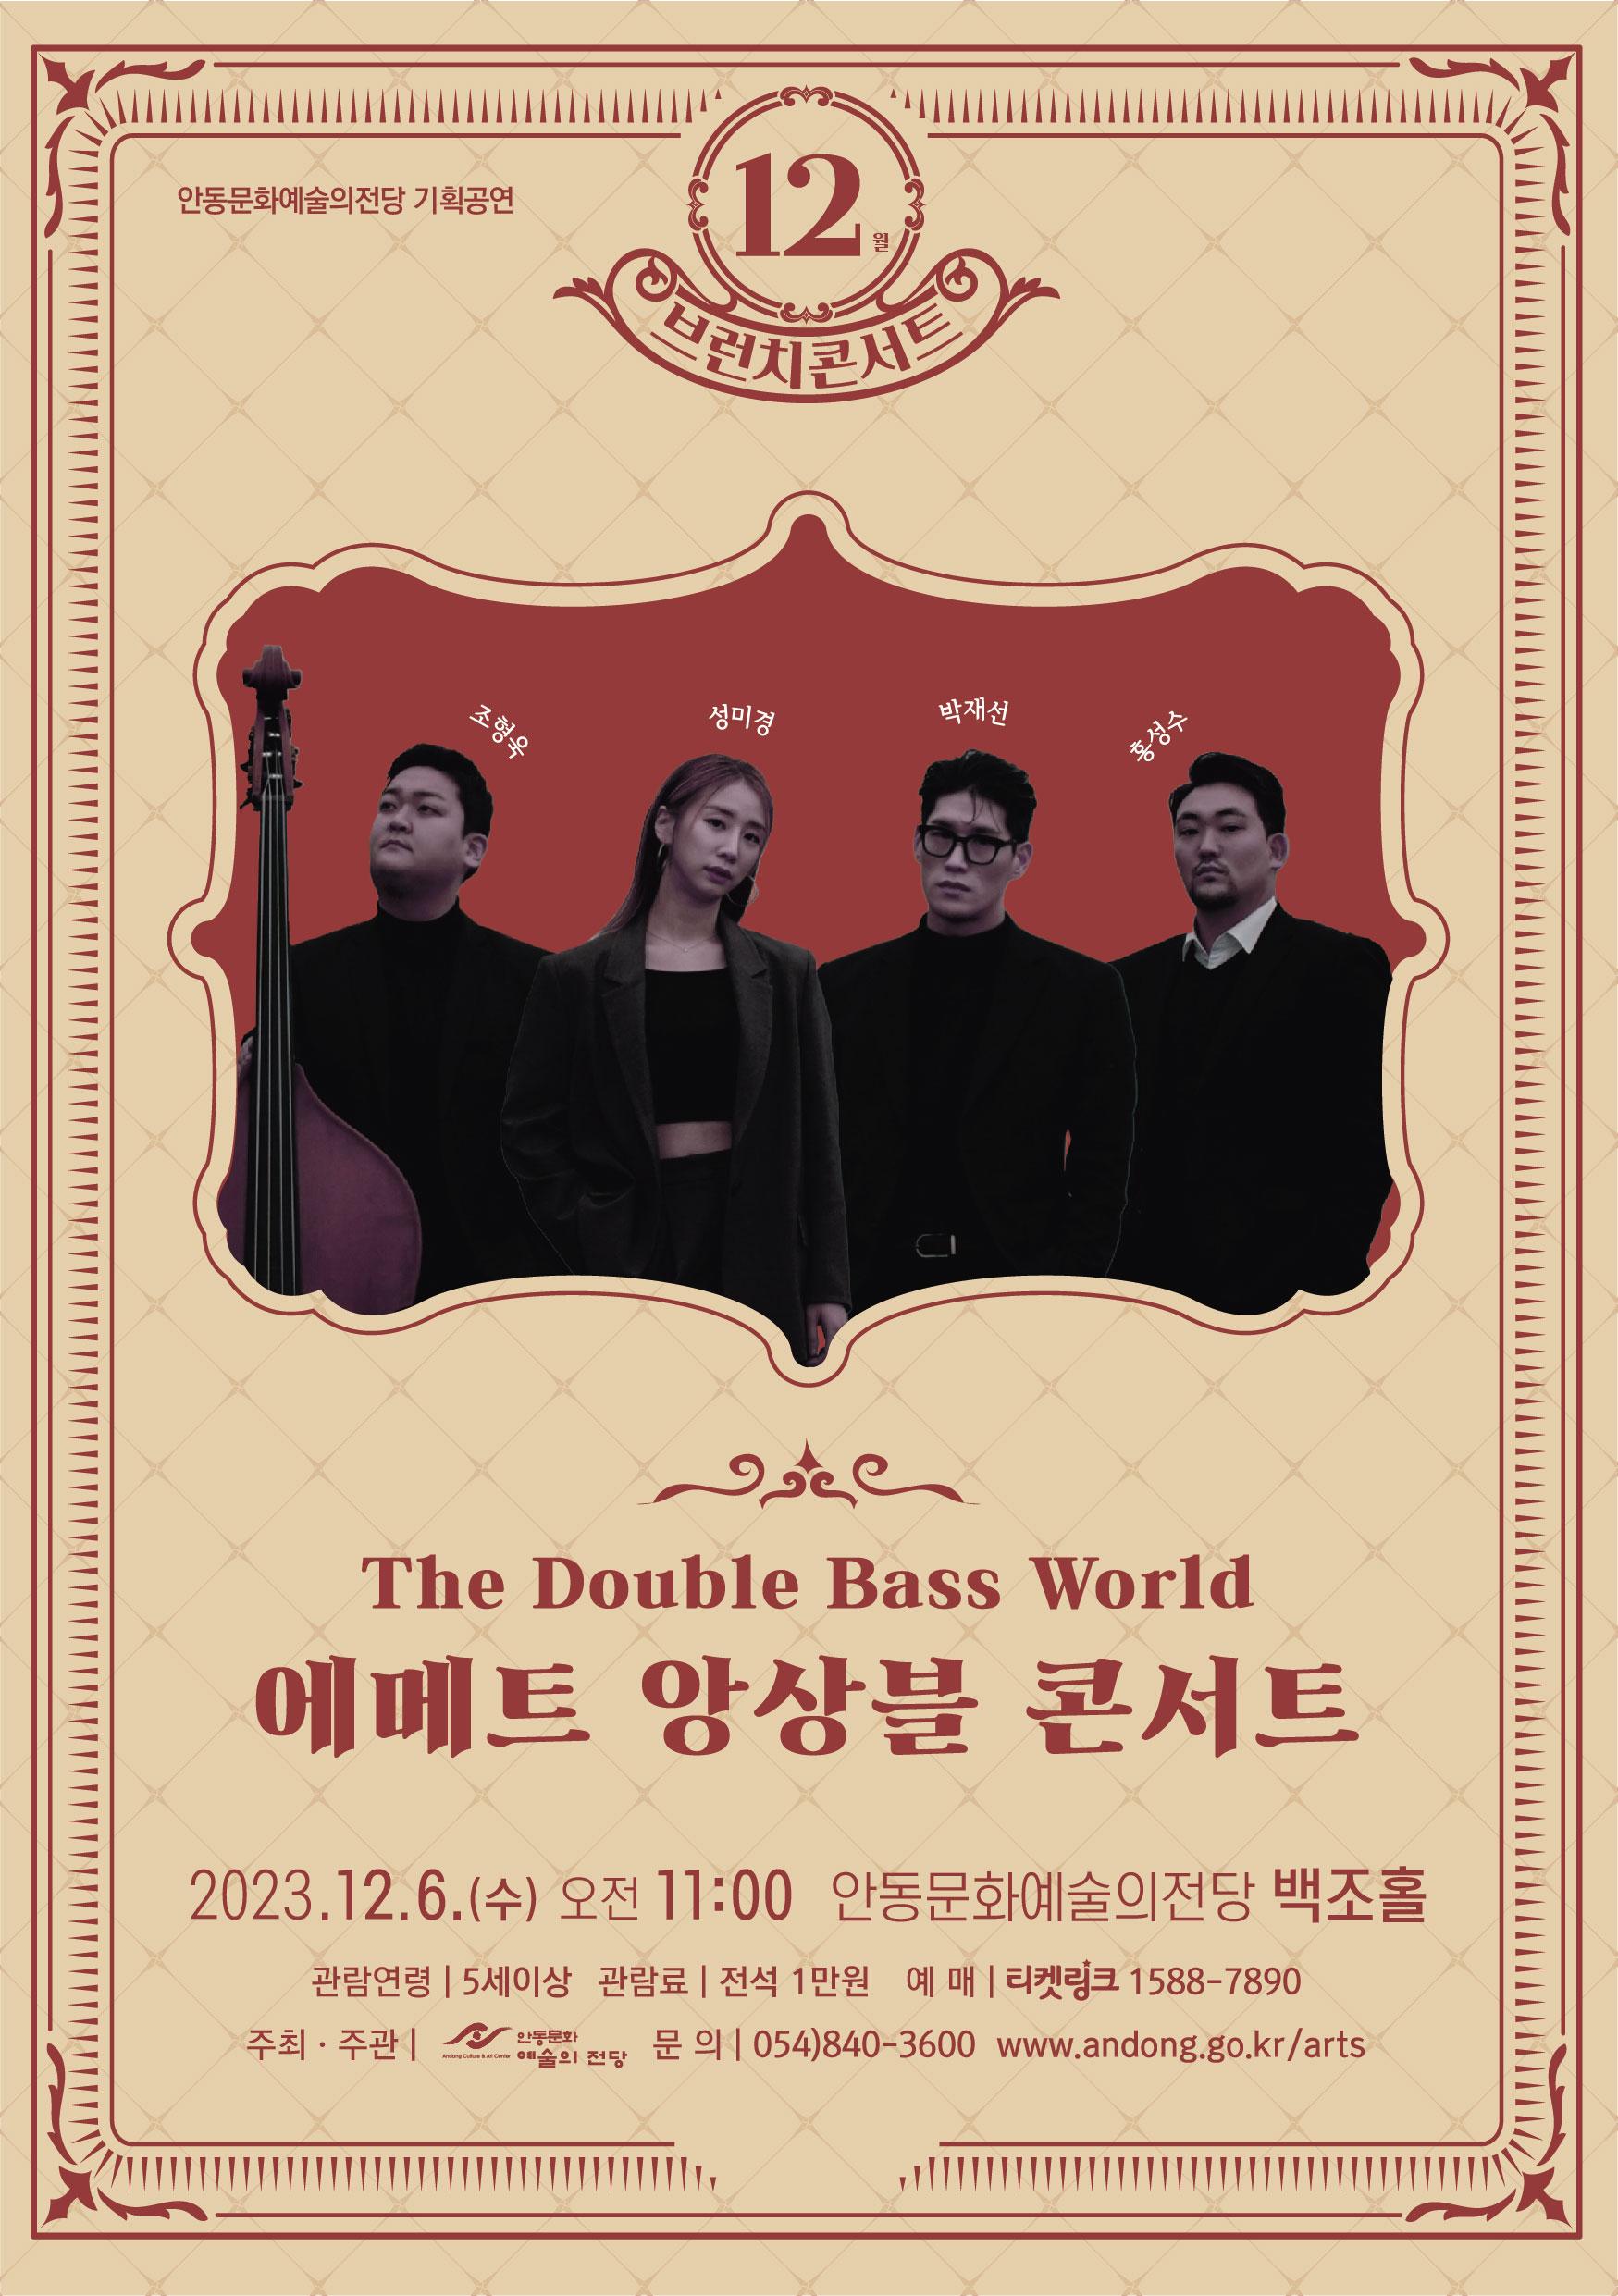 "The Double Bass World" brunch concert - Emeth Ensemble in Andong poster